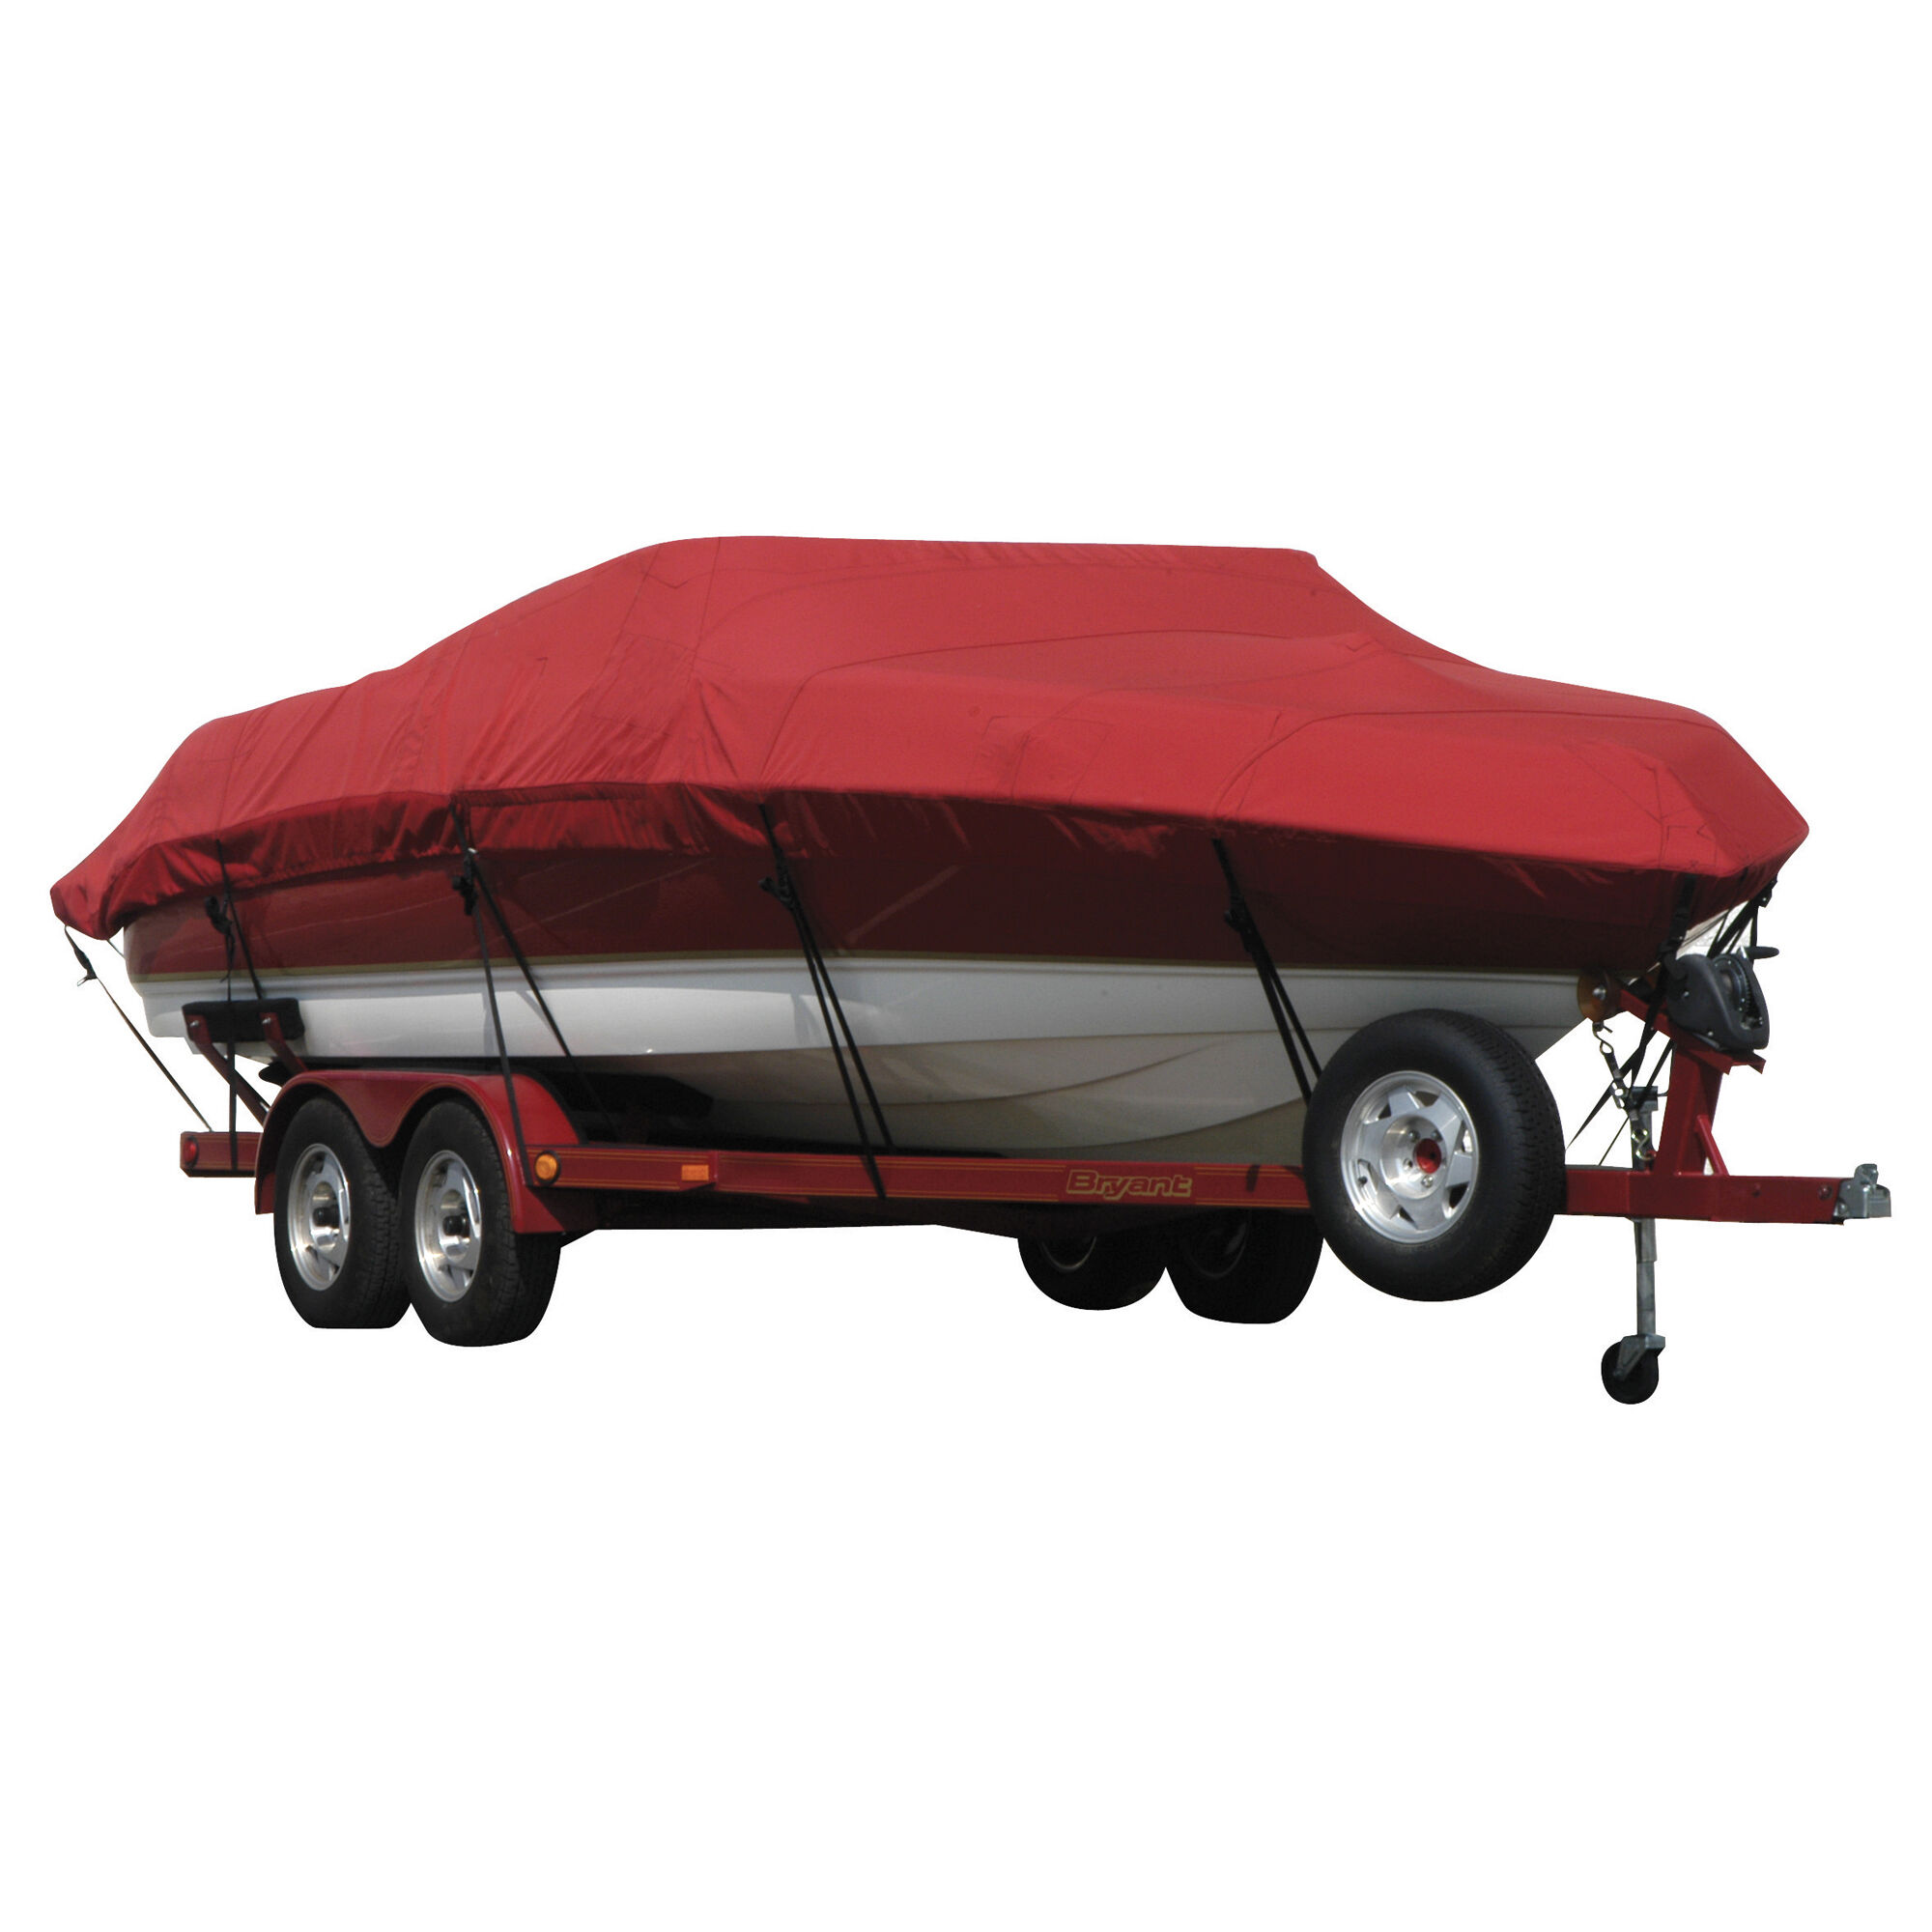 Covermate BAYLINER CIERA 2655 SB NO WING I/O Boat Cover in Red